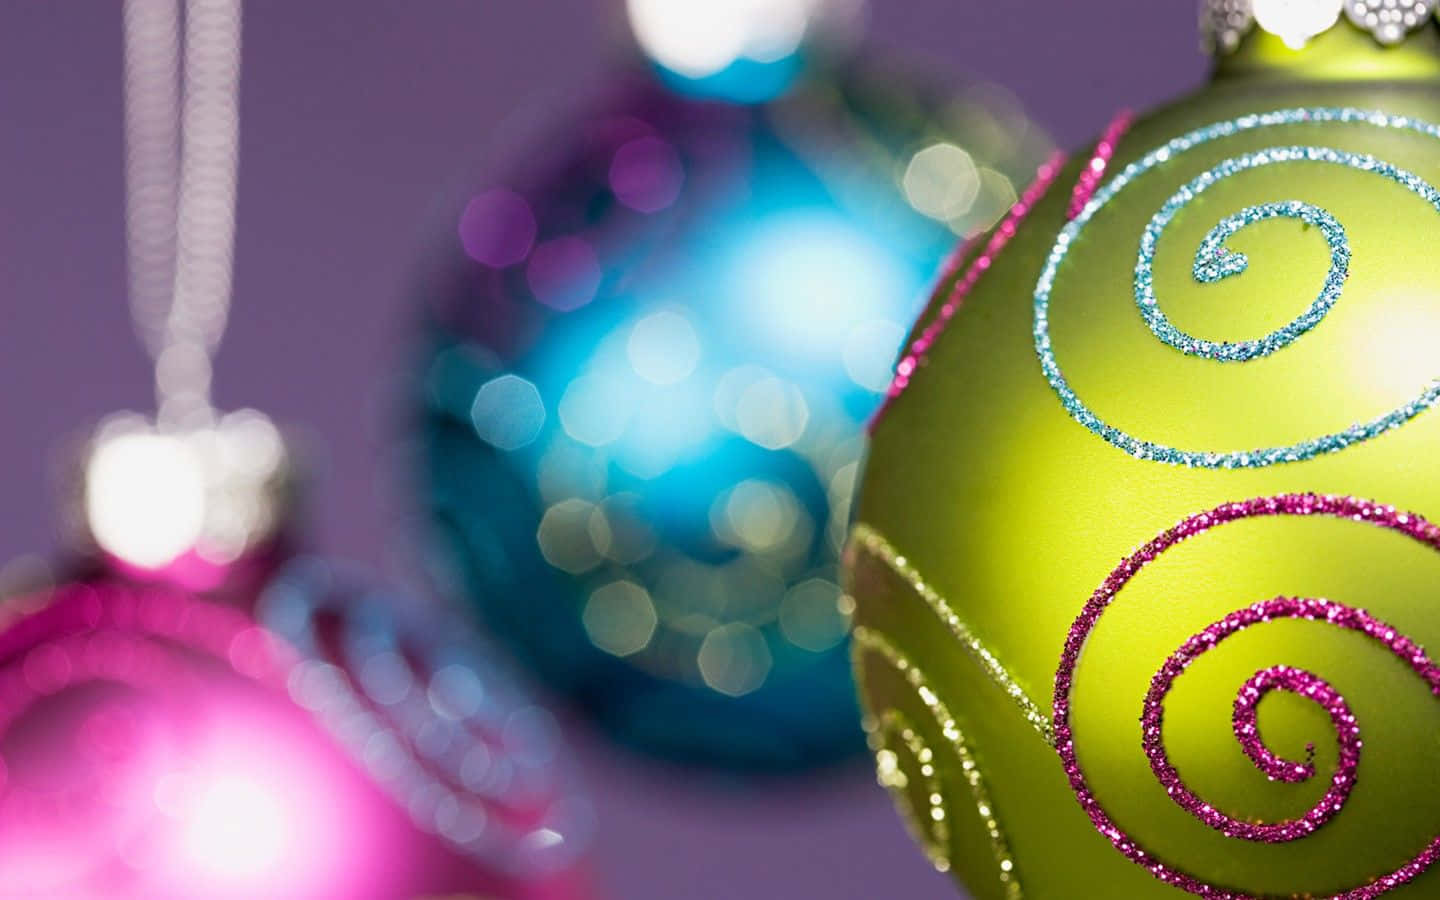 A christmas ornament adorns the holiday season with festive colors Wallpaper